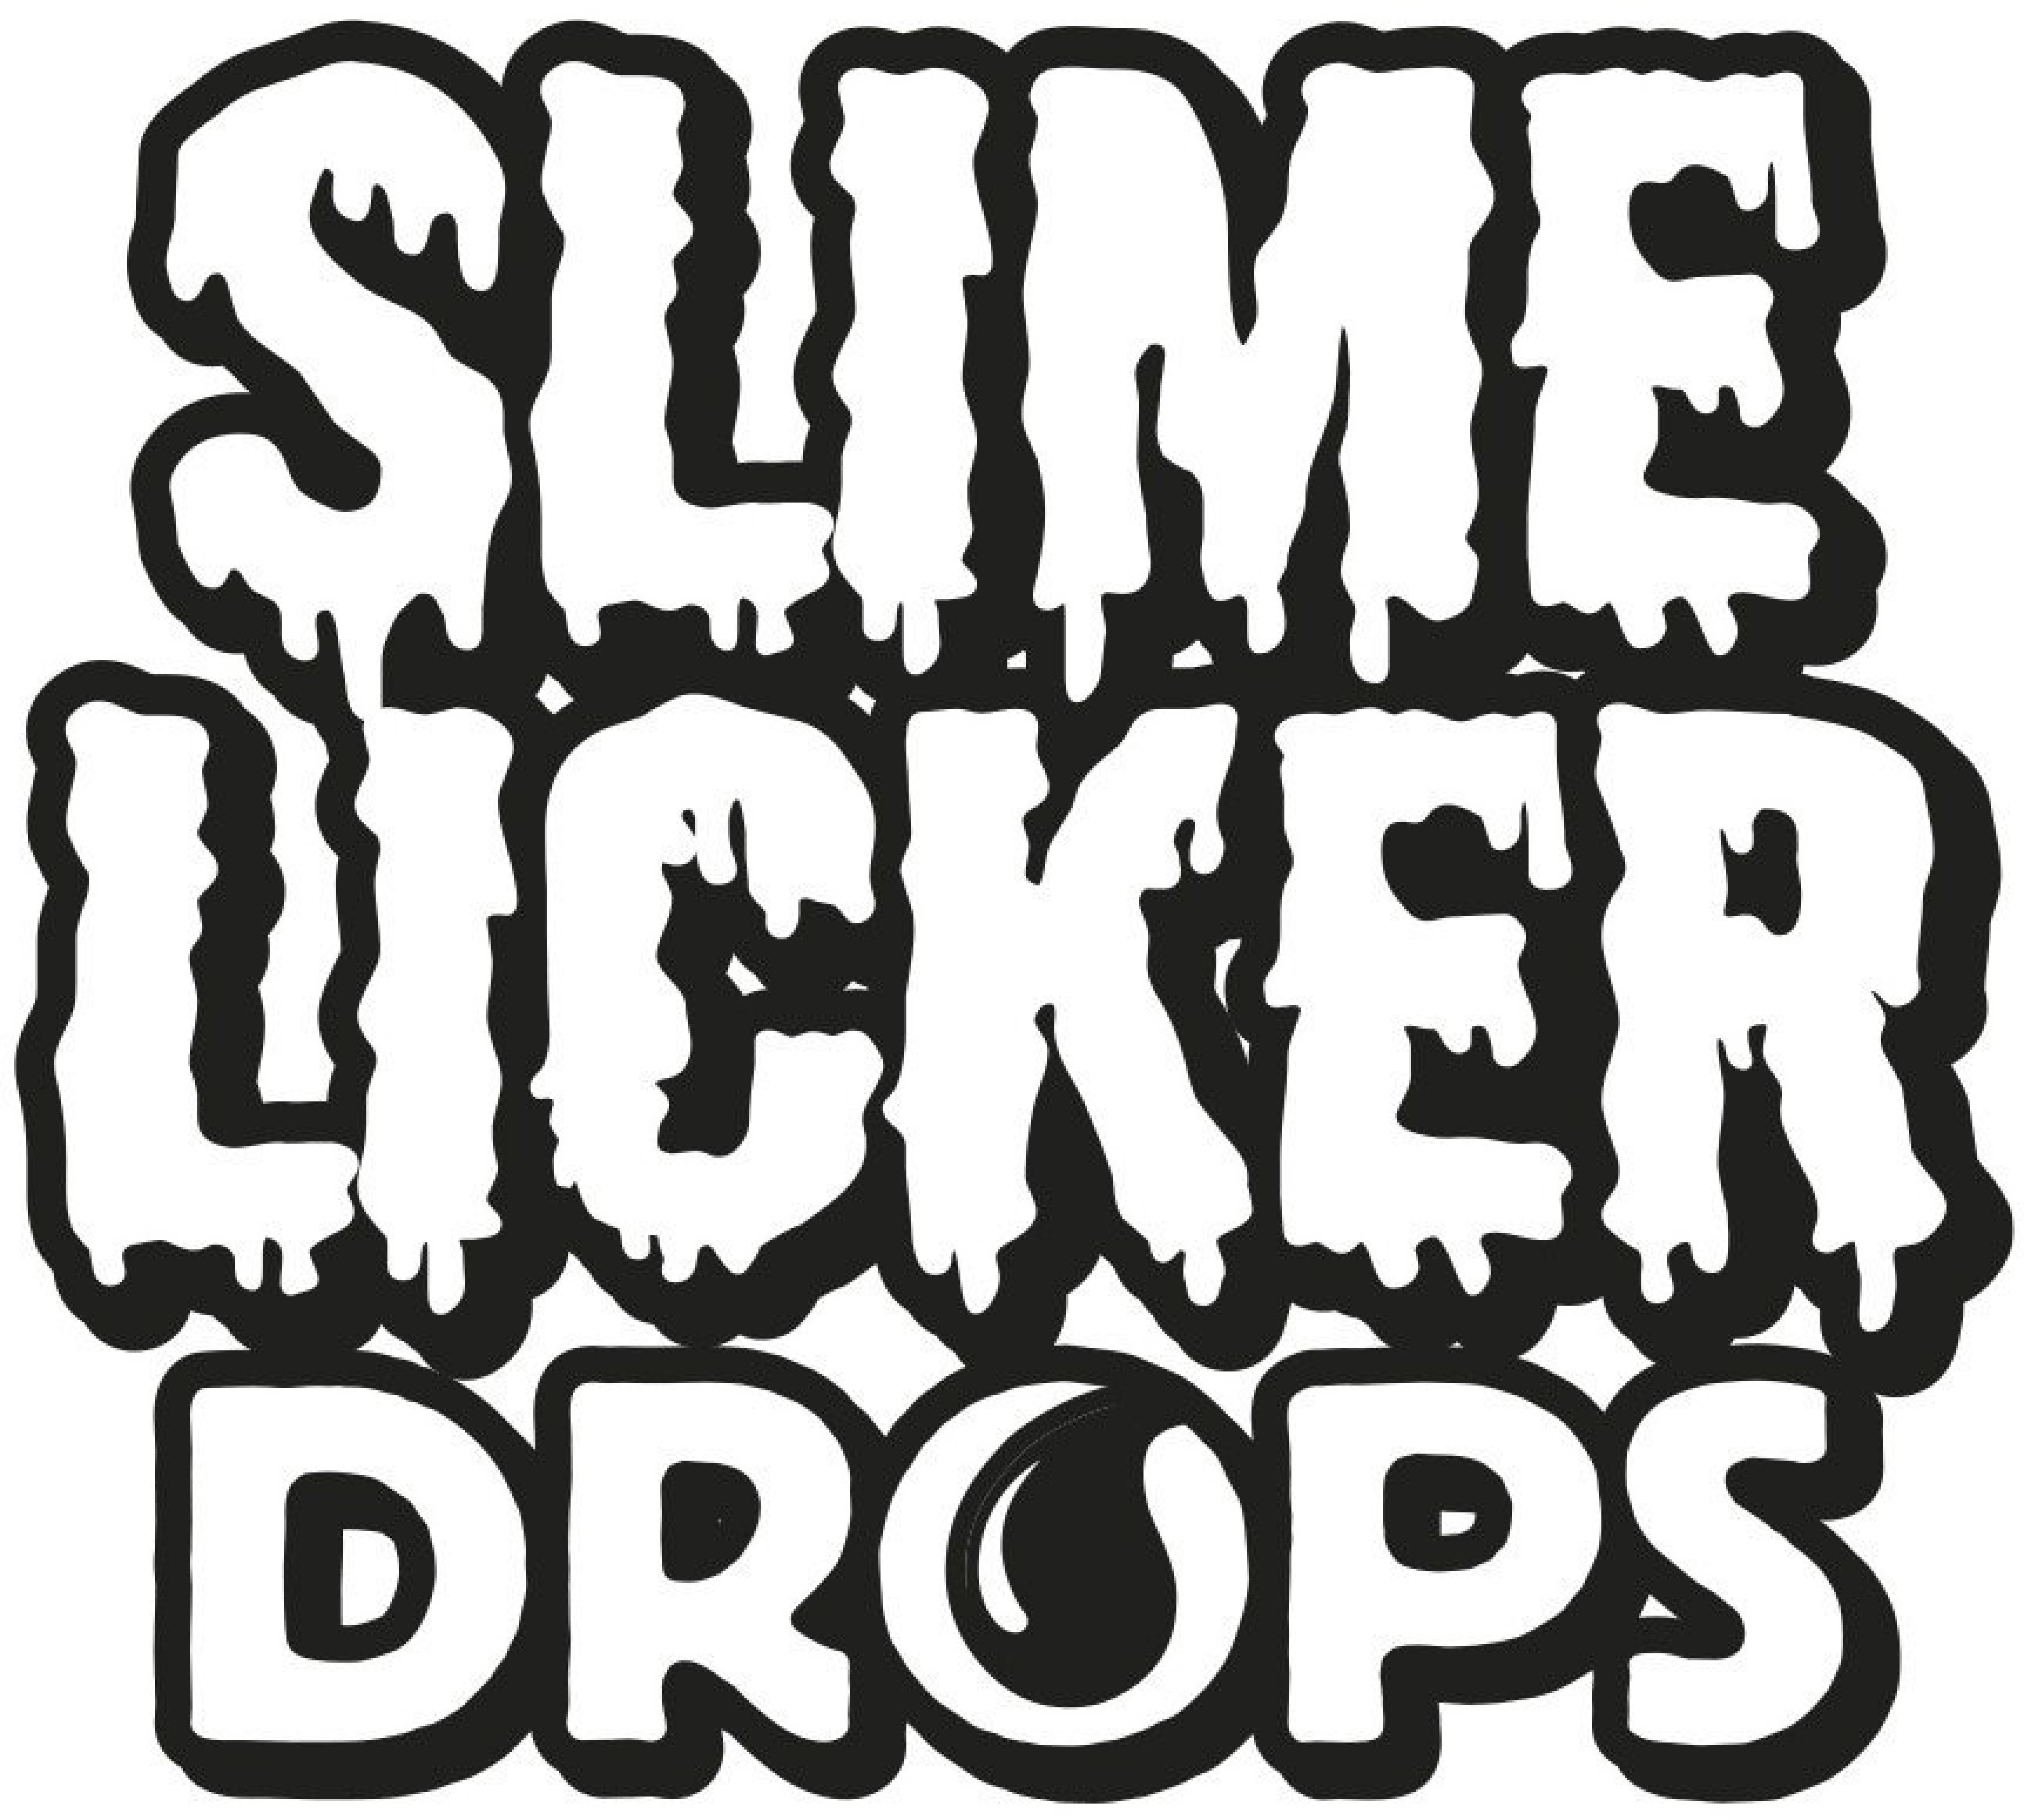 Slime licker drawing